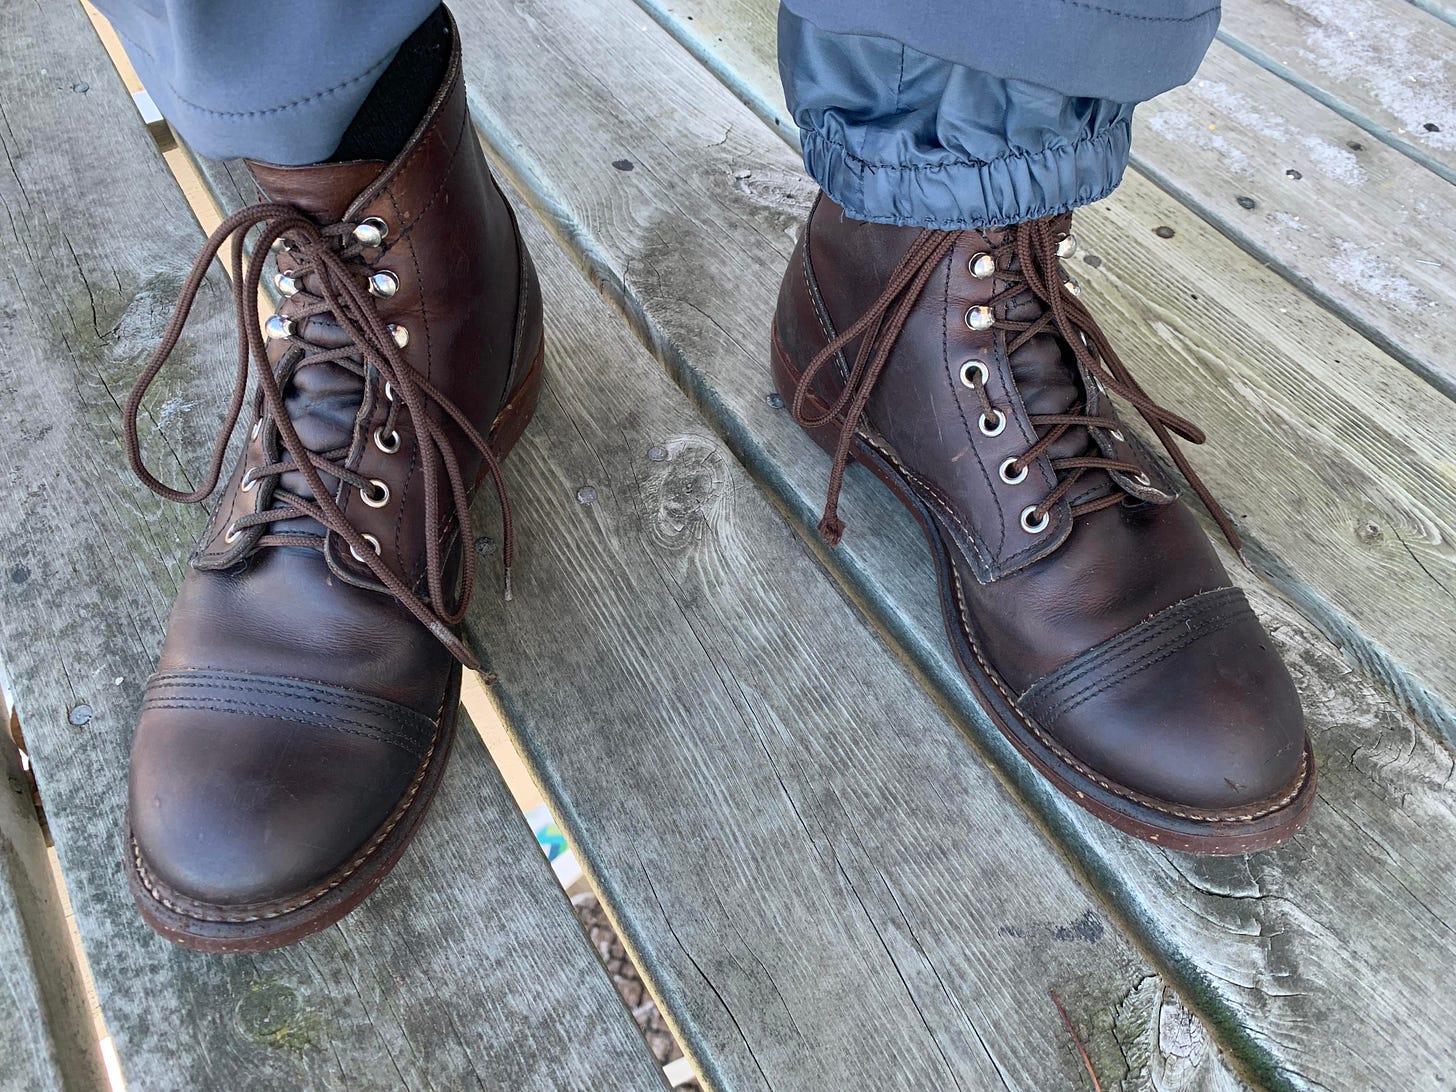 In Review: The Red Wing 8111 Iron Ranger Boots